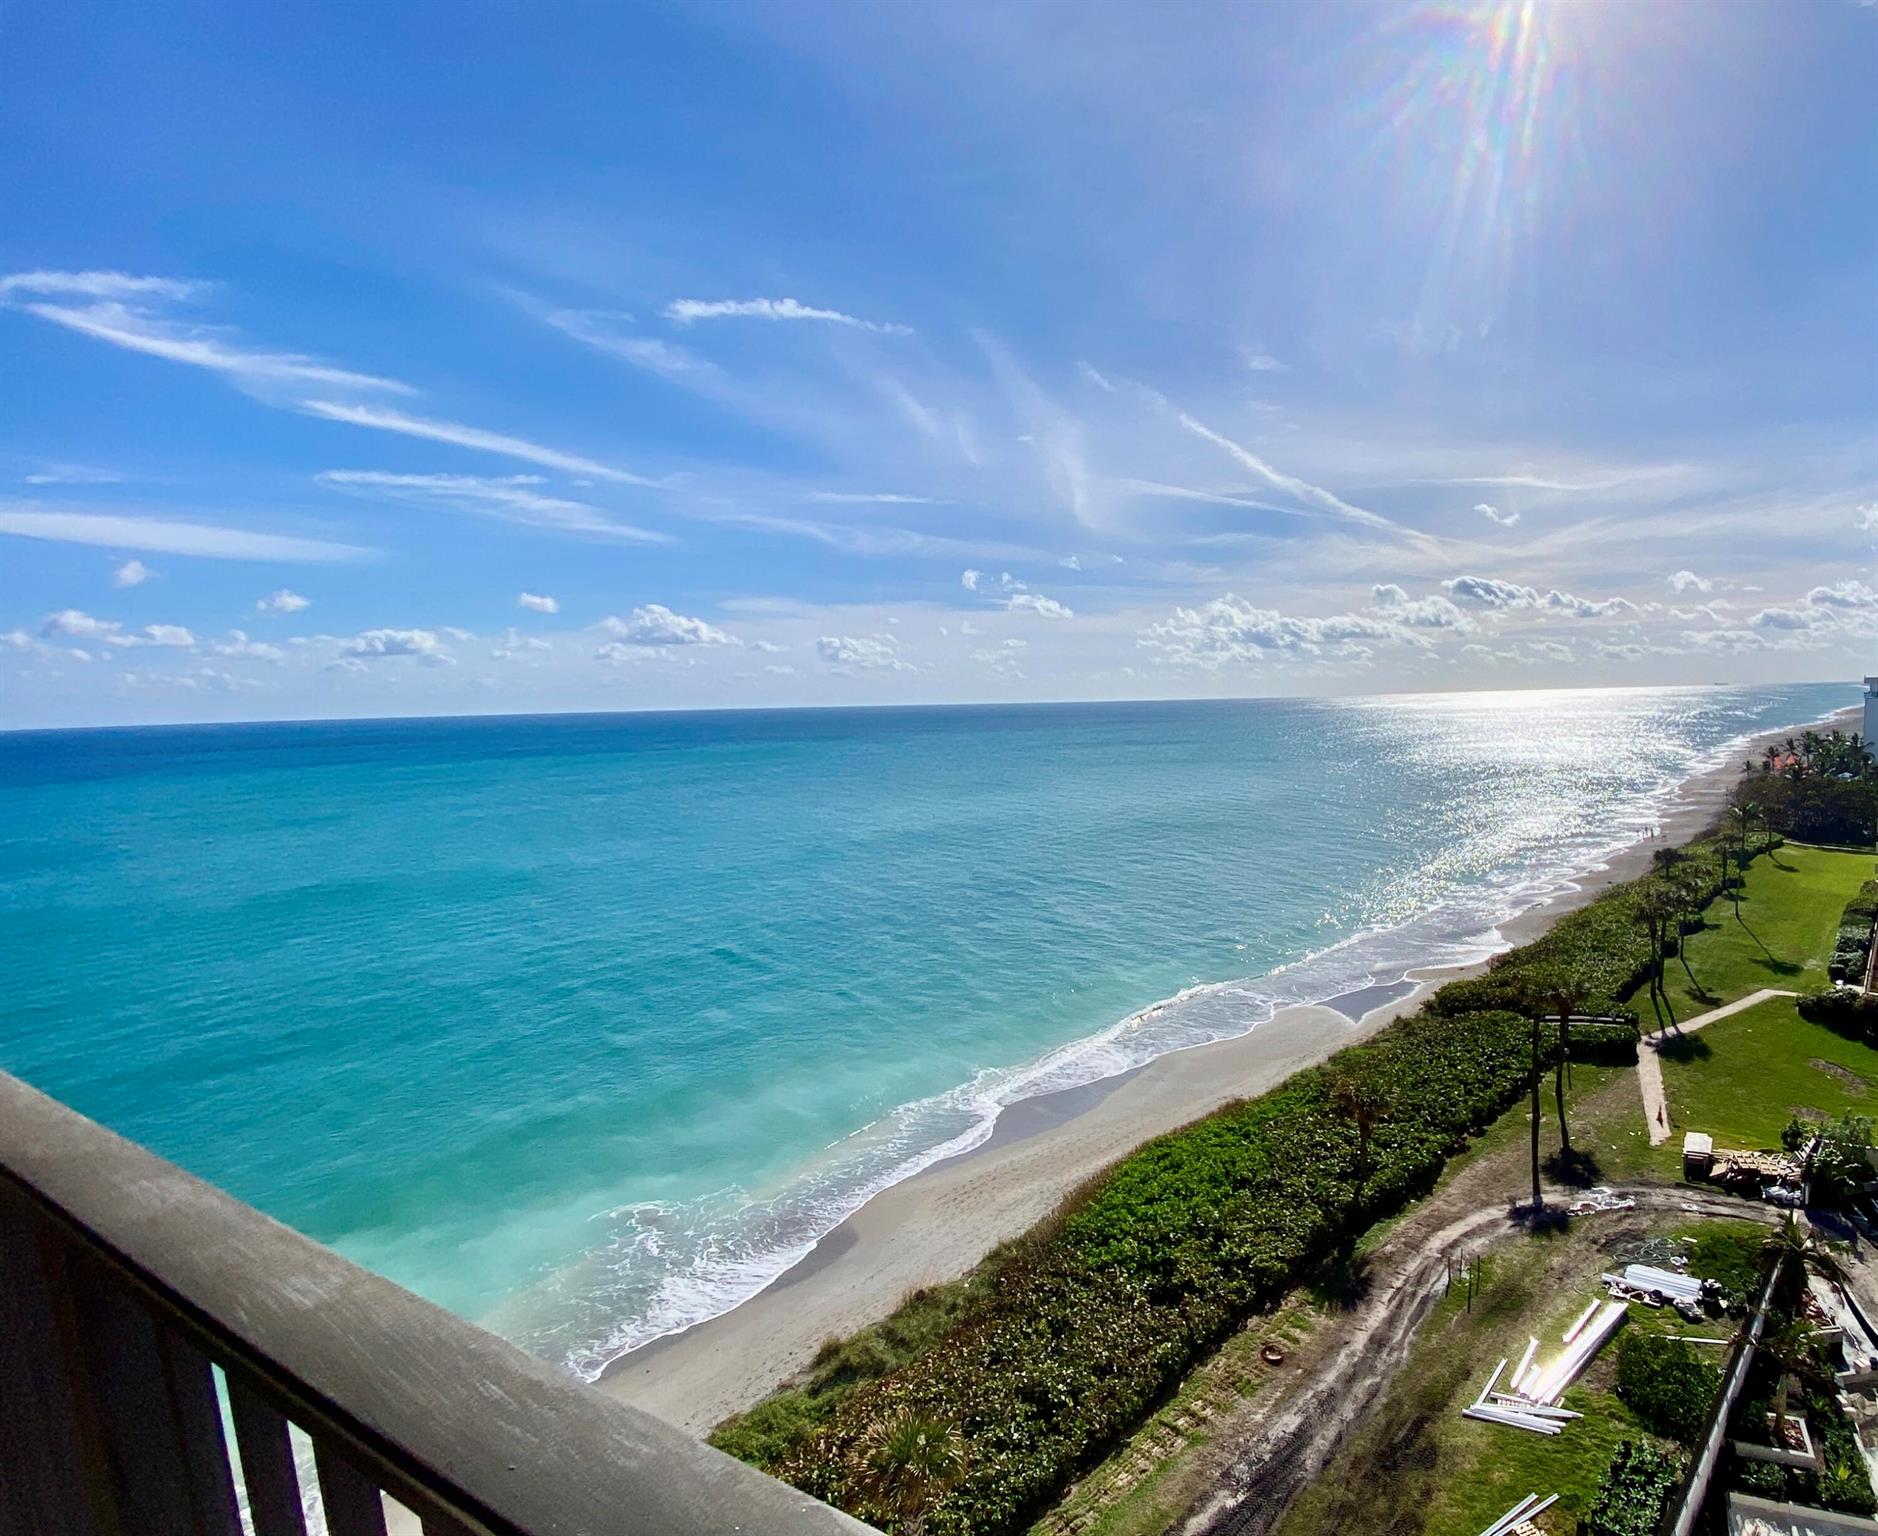 Unparalleled end unit! Completely renovated 2021 w/multiple balconies. White marble floors, neutral colors, crown molding, gorgeous stone selections in the kitchen & baths, frameless glass shower door, built in closets, New Bosch AC '23. Ocean Trail is a unique oceanfront condo community sitting directly on the sand overlooking the blue ocean, Jupiter Inlet & Juno Beach Pier. The gated community nestled between the Atlantic Ocean & a salt water estuary. This end unit condos features 2 bedroom, 2 bath with 1270 square feet. The open air balconies allow residence to enjoy the ocean breezes and take in the beautiful views. There is access to community pools, tennis courts, fitness centers and a short walk to the Jupiter Inlet, Carlin Park, and Dubois Park located just outside the gate.